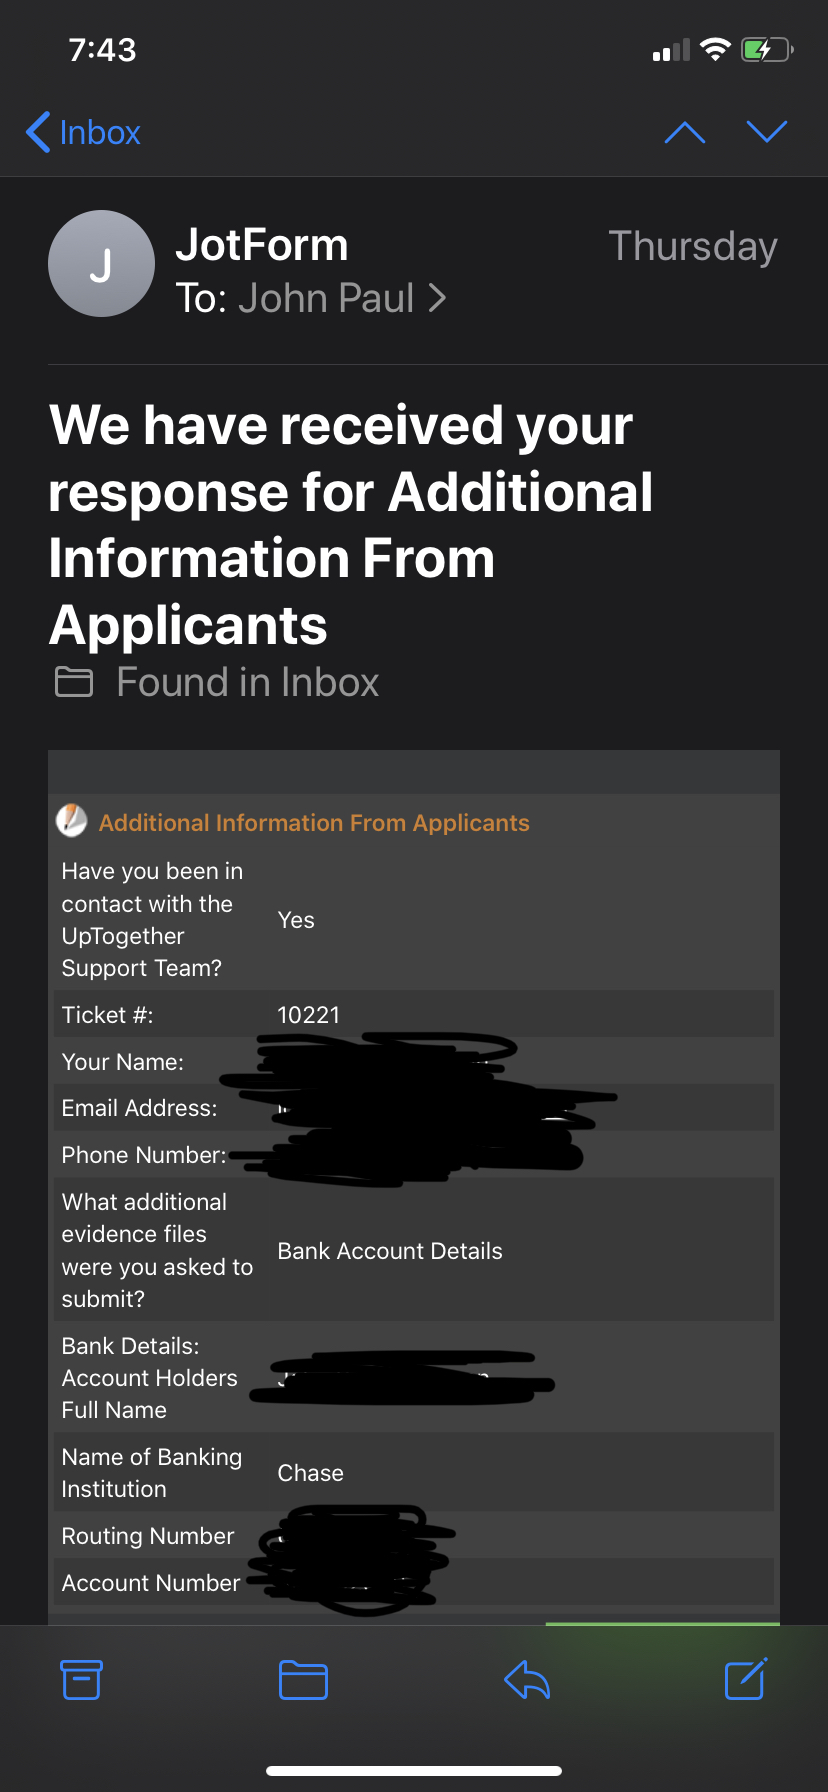 Additional information about my application